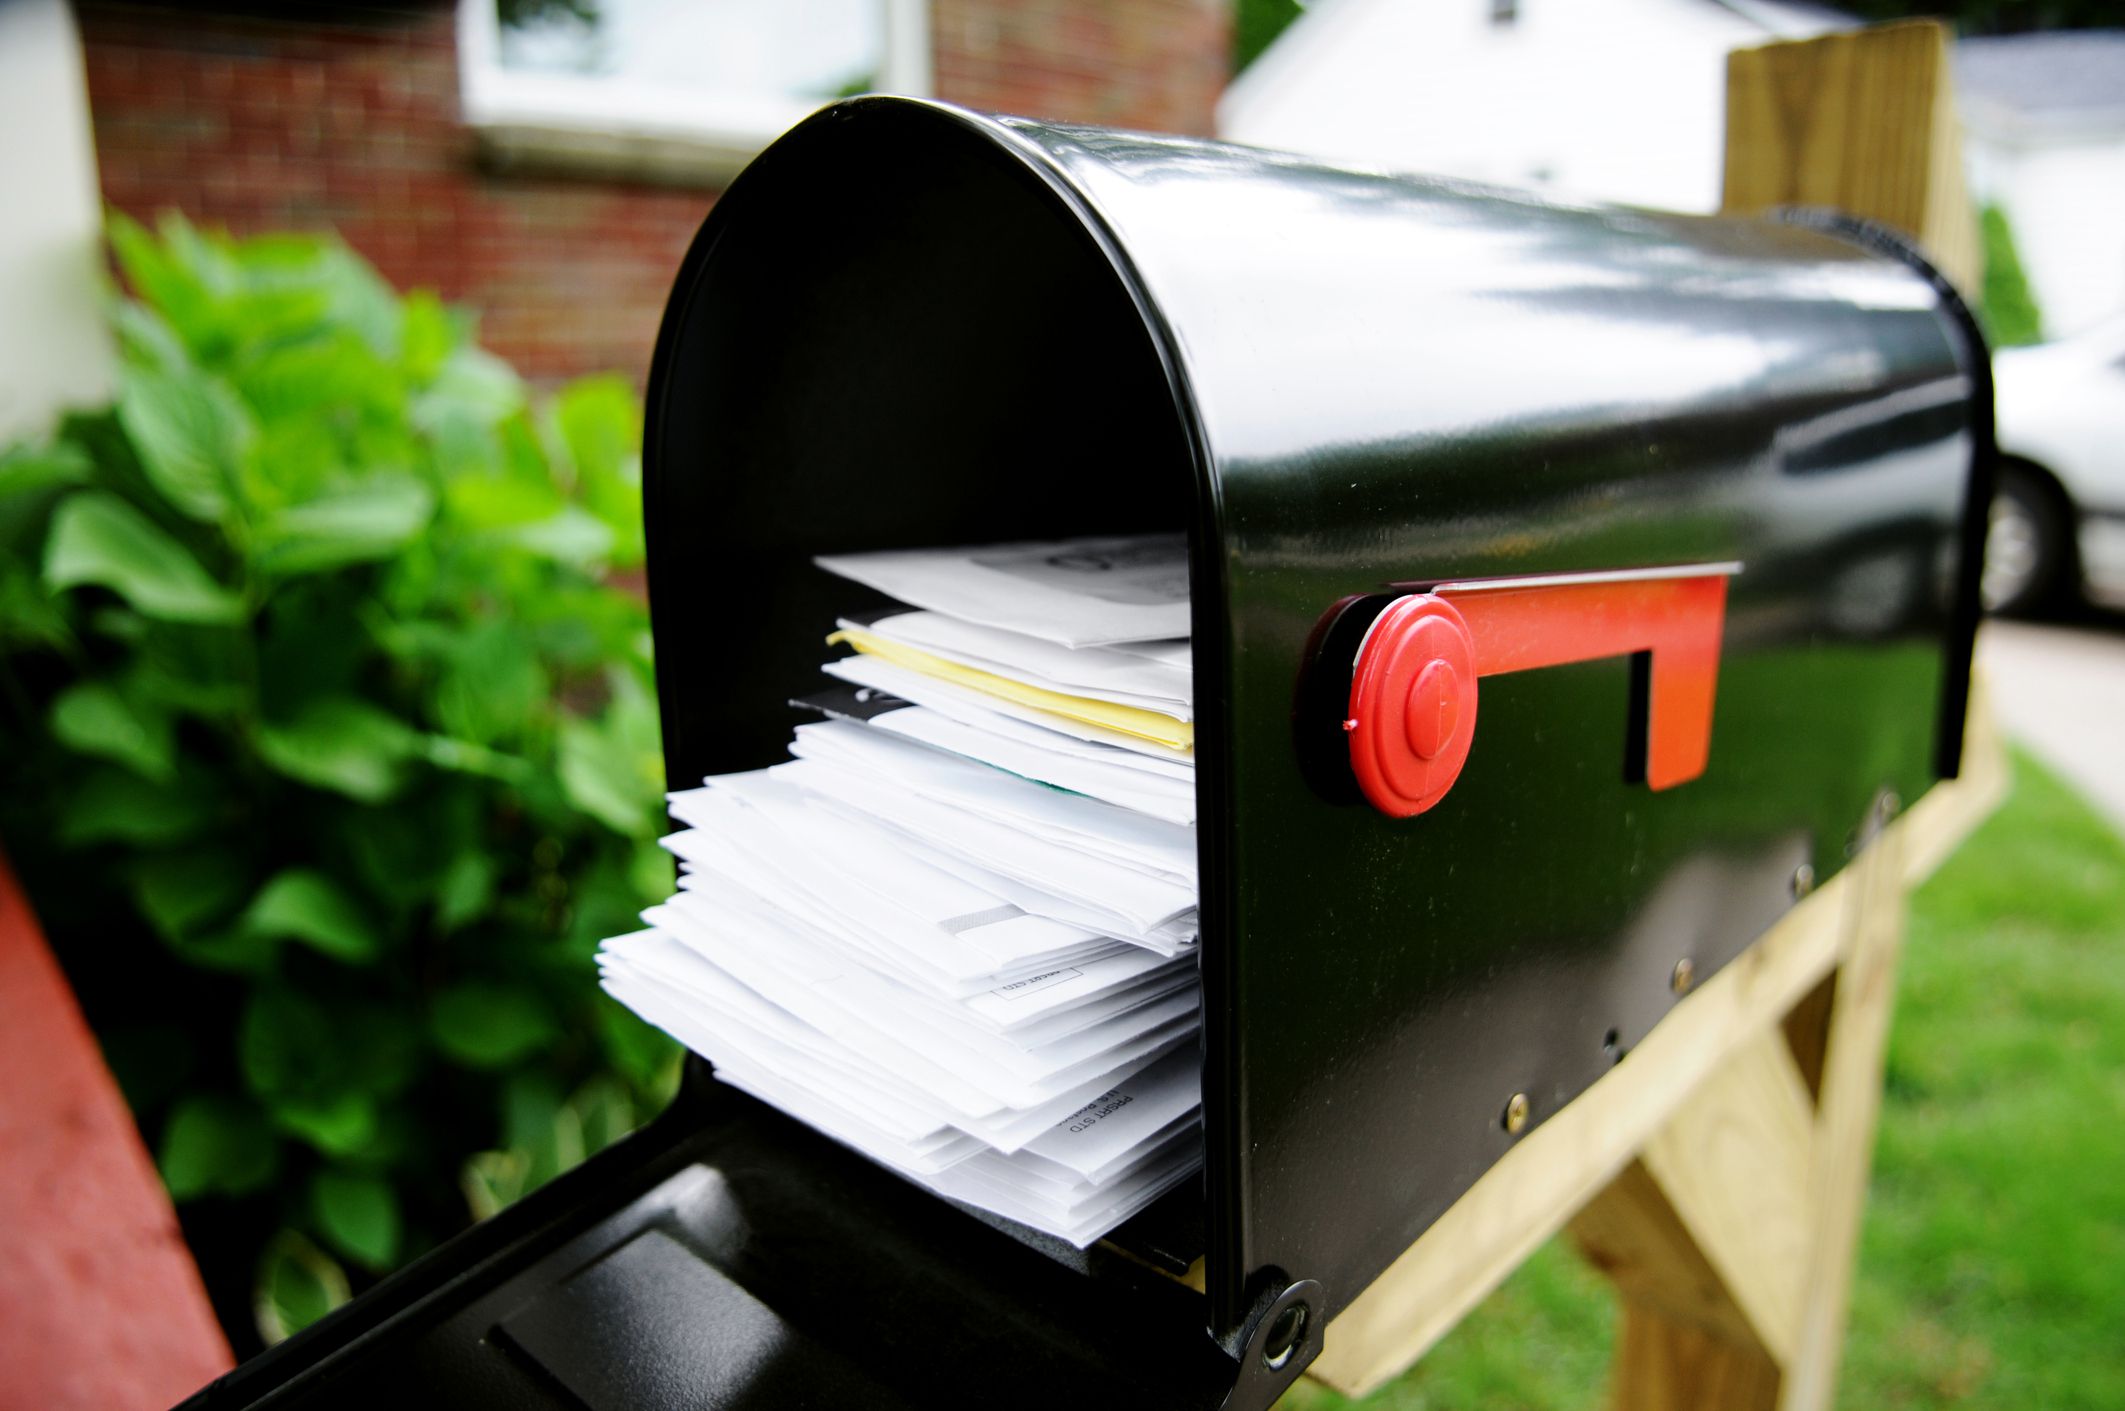 Can Your Identity Be Stolen Through Junk Mail?